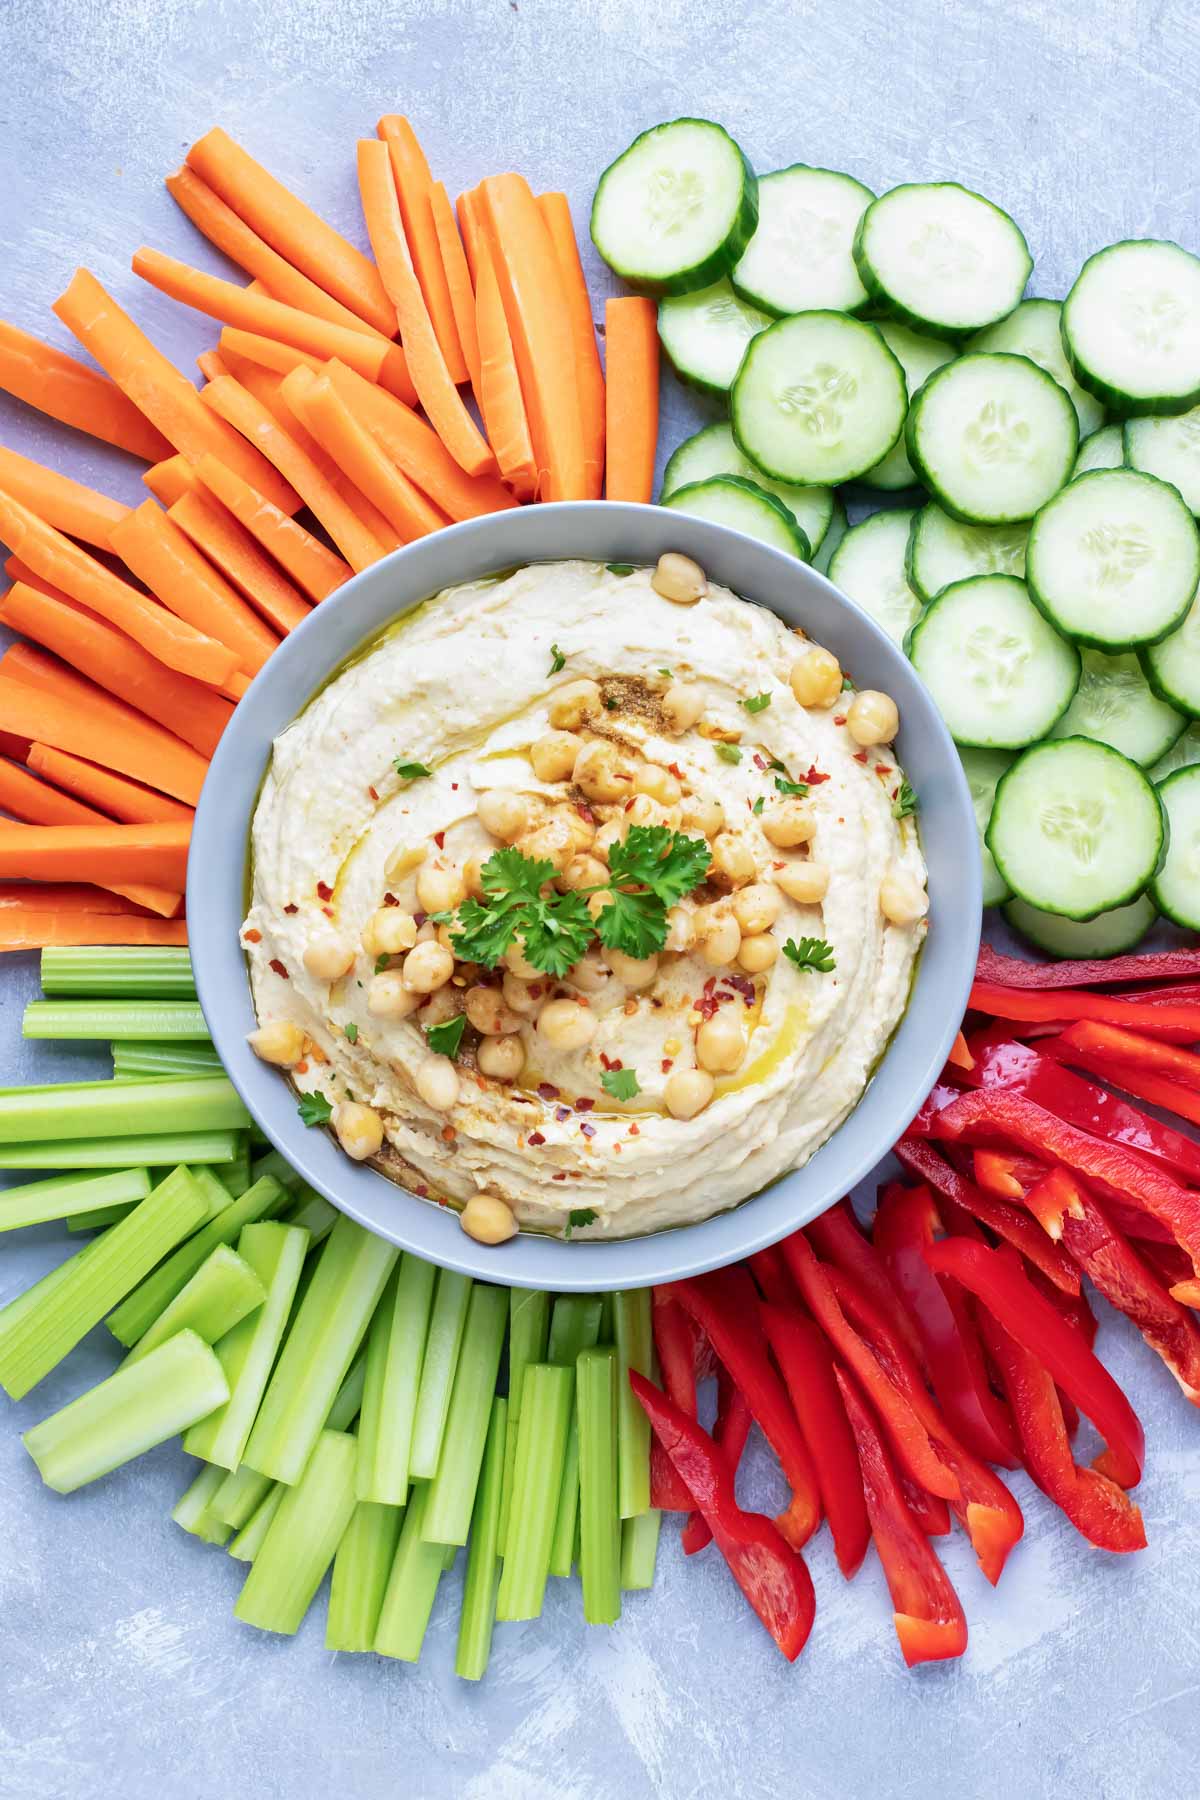 An easy hummus recipe in a grey bowl with carrots, cucumbers, bell peppers, and celery to serve with it.